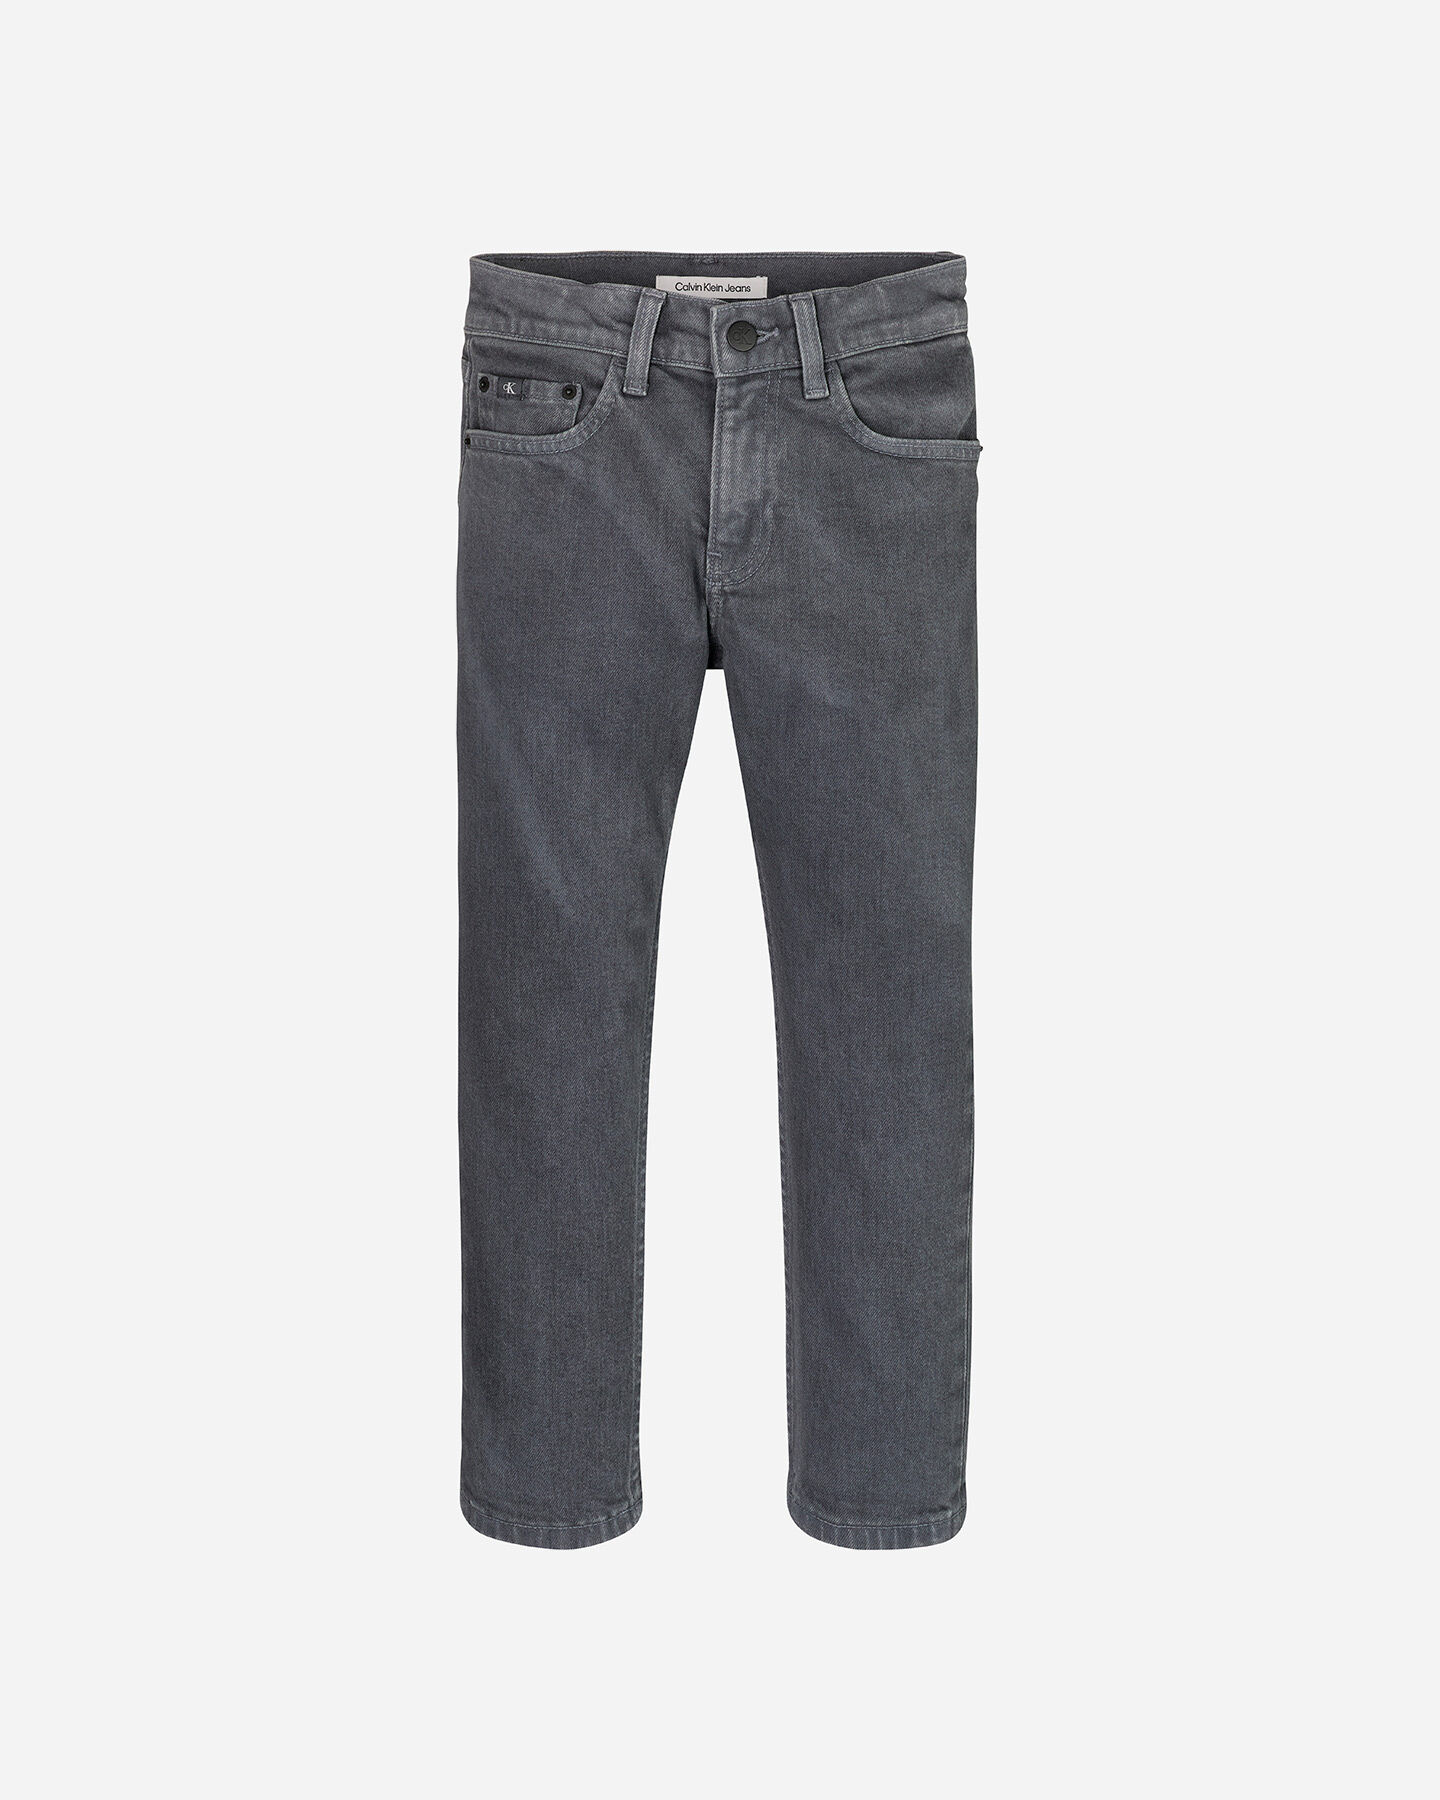  Jeans CALVIN KLEIN JEANS DAD FIT JR S4126910|1BY|10 scatto 0